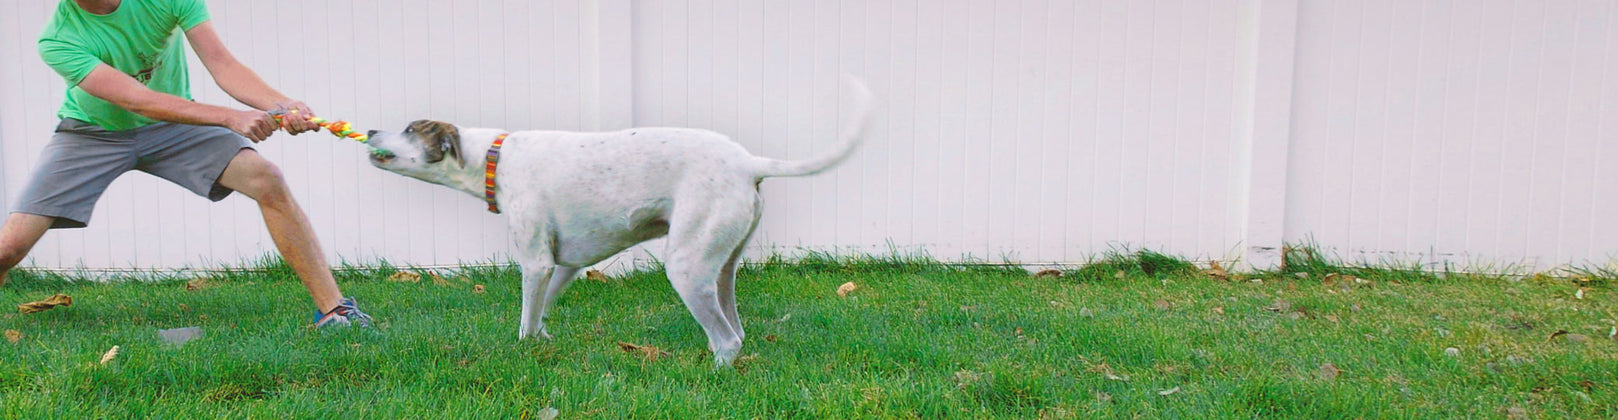 6 Games You Should Play With Your Dog To Build Smarts and Loyalty!